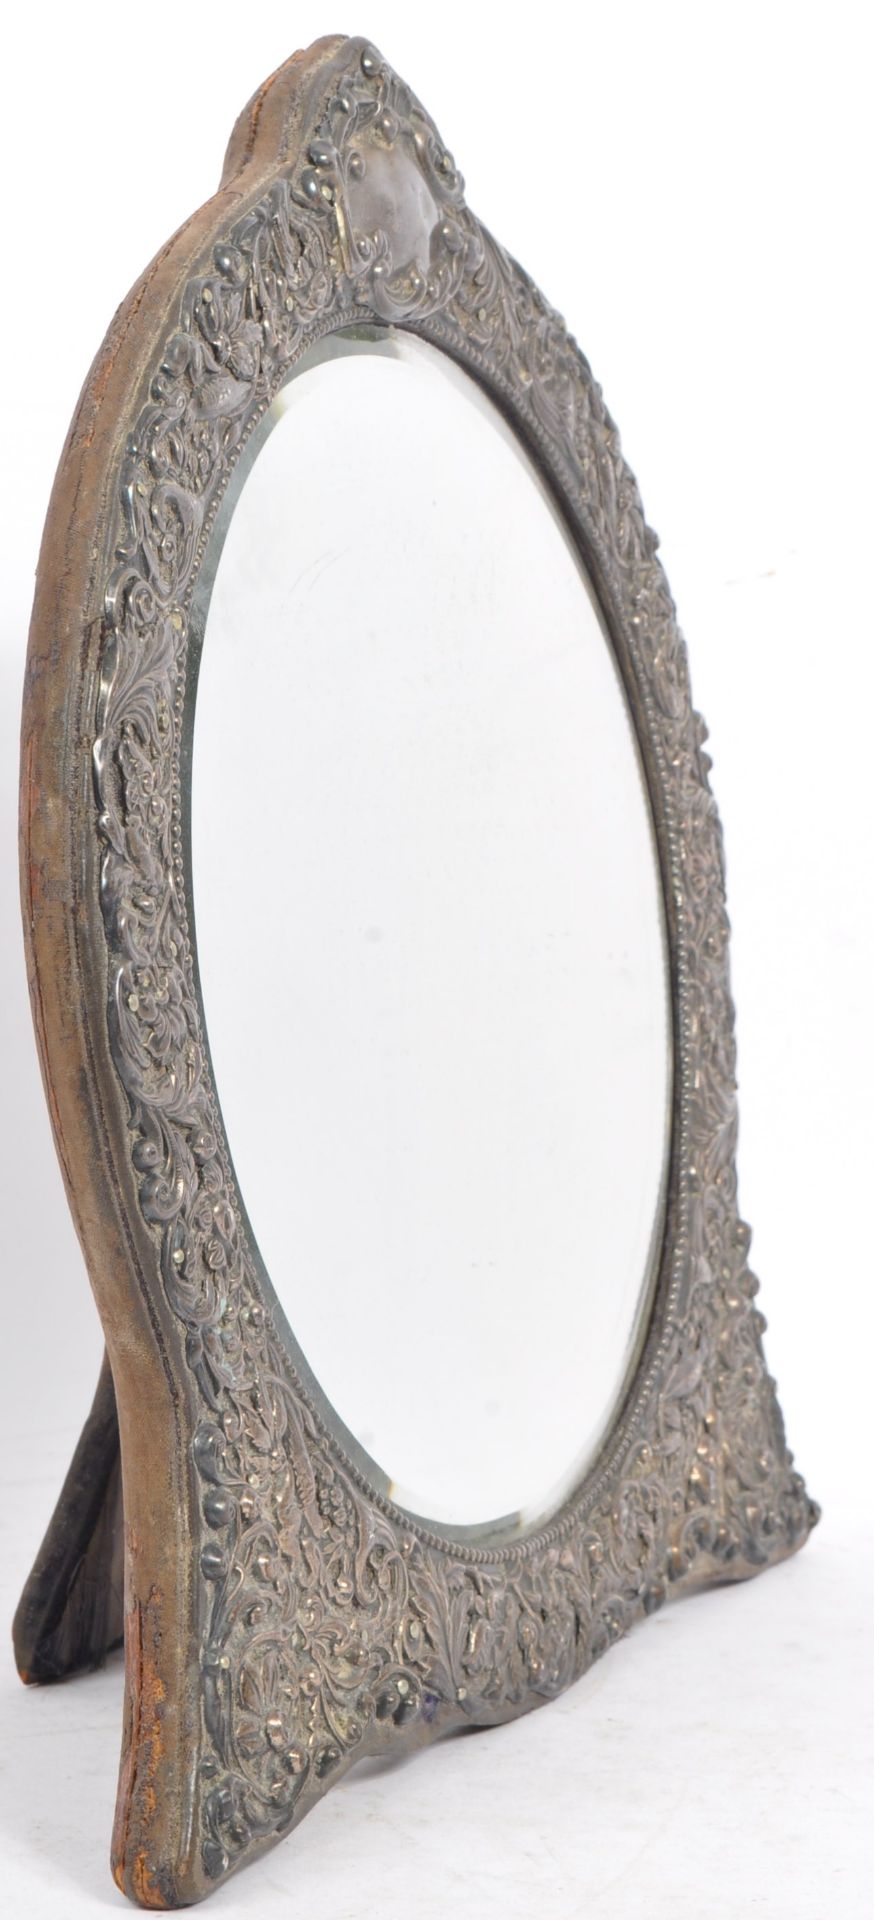 EARLY 20TH CENTURY 1930S FREE STANDING DRESSING TABLE MIRROR - Image 5 of 8